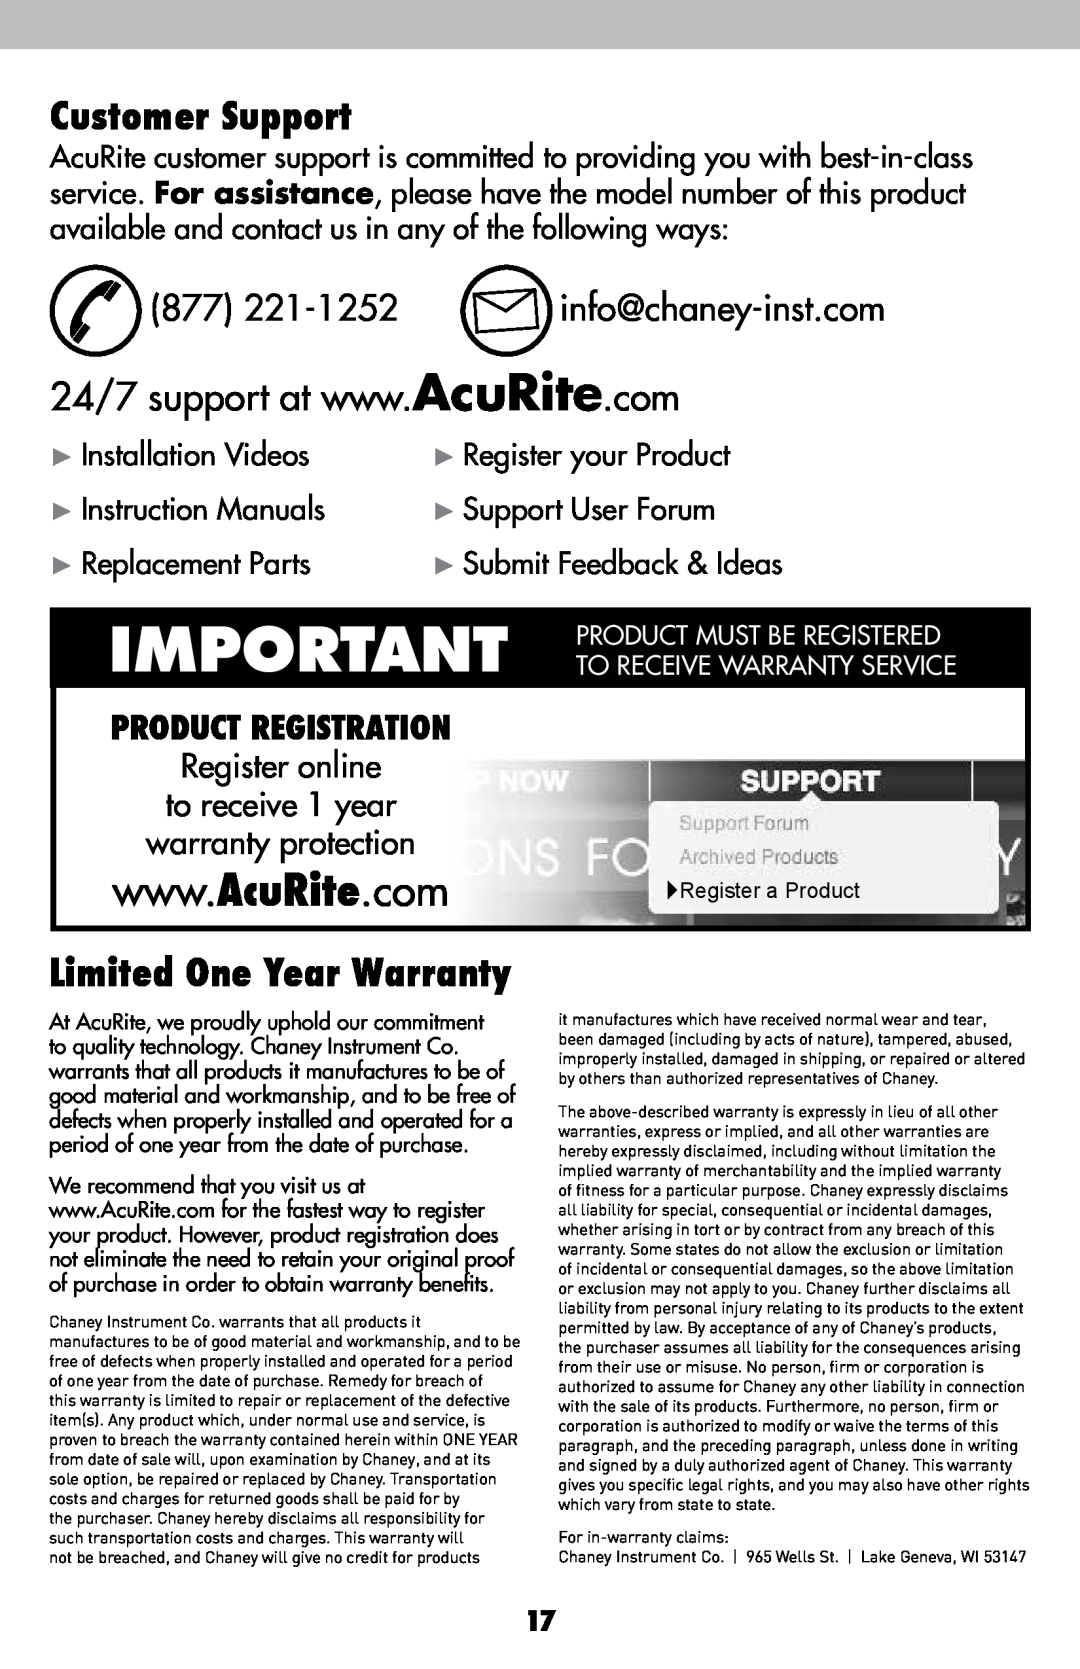 Acu-Rite 589 Customer Support, Limited One Year Warranty, 877 221-1252 info@chaney-inst.com, Installation Videos 